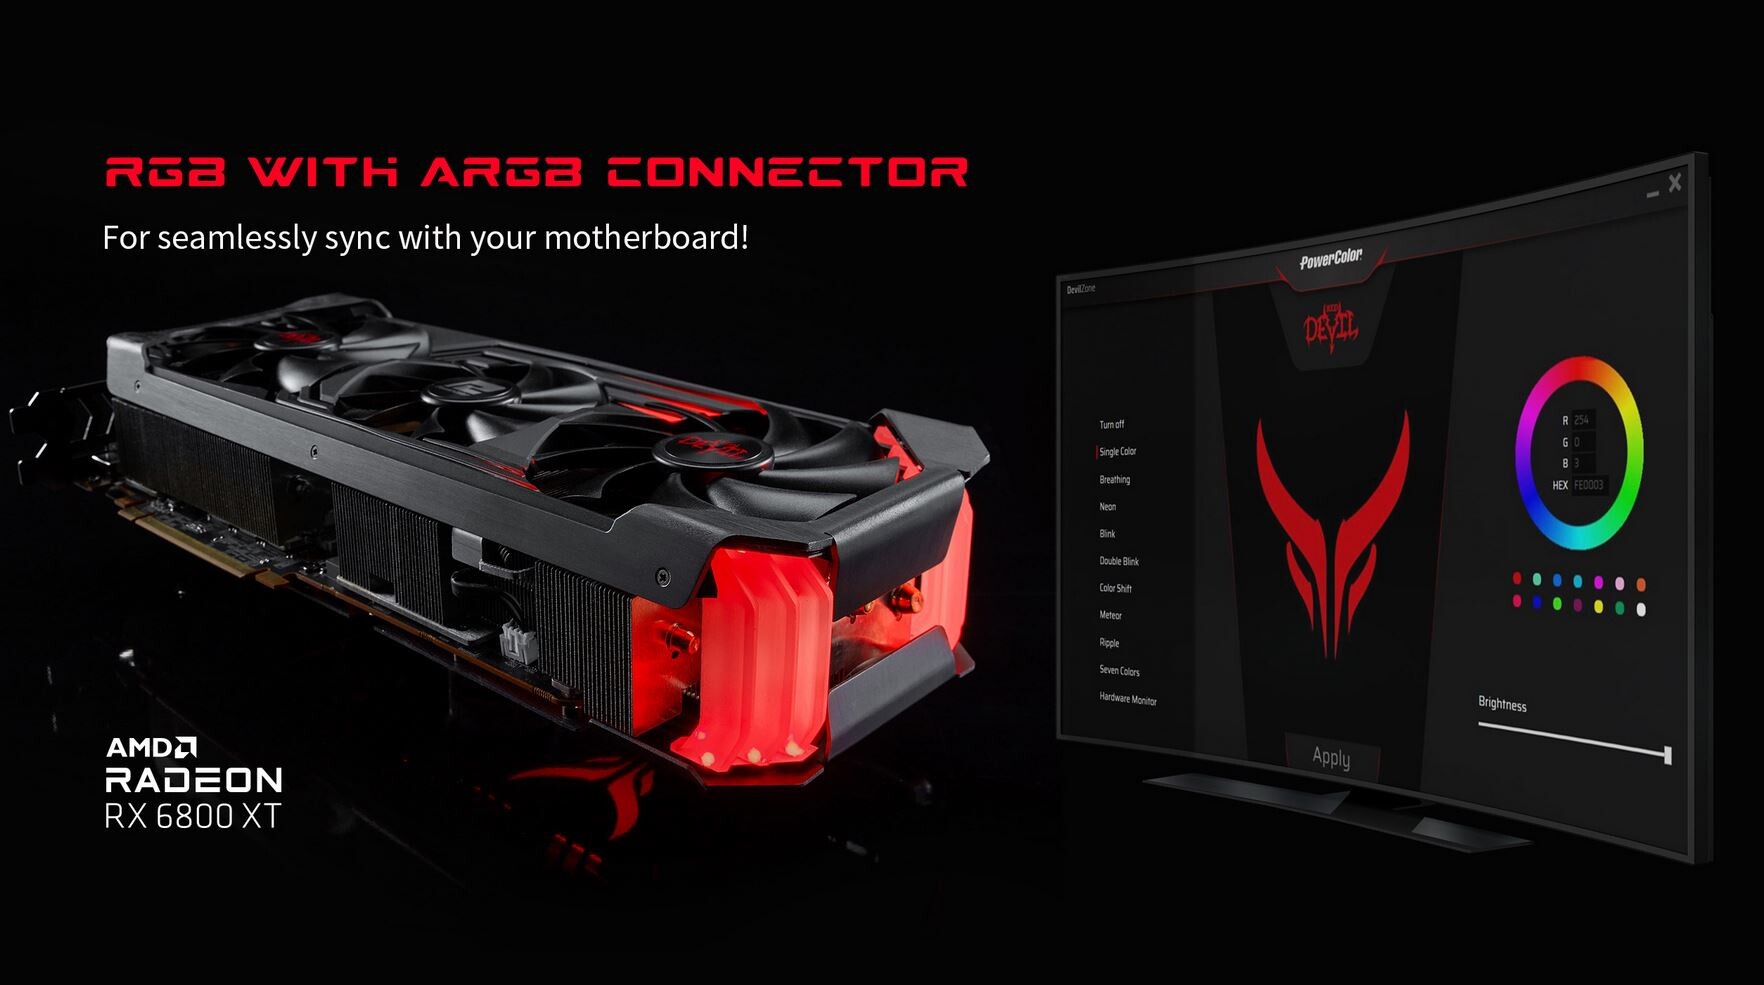 PowerColor Radeon RX 6800 XT Red Devil Review - Overclocking